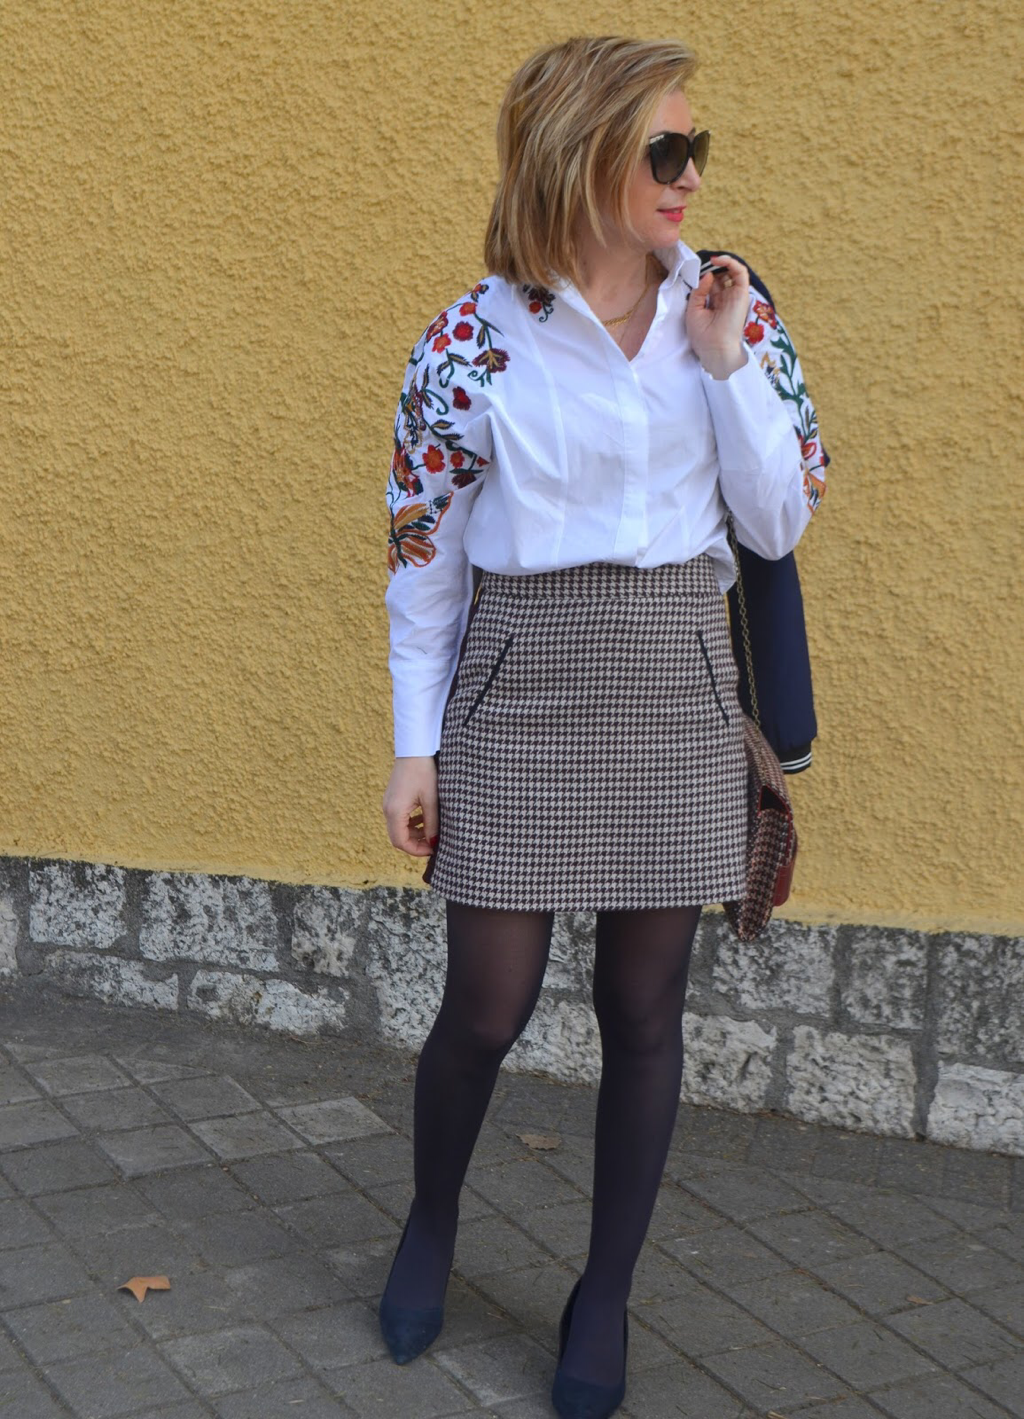 WHITE EMBROIDERED SHIRT - Fashion Tights